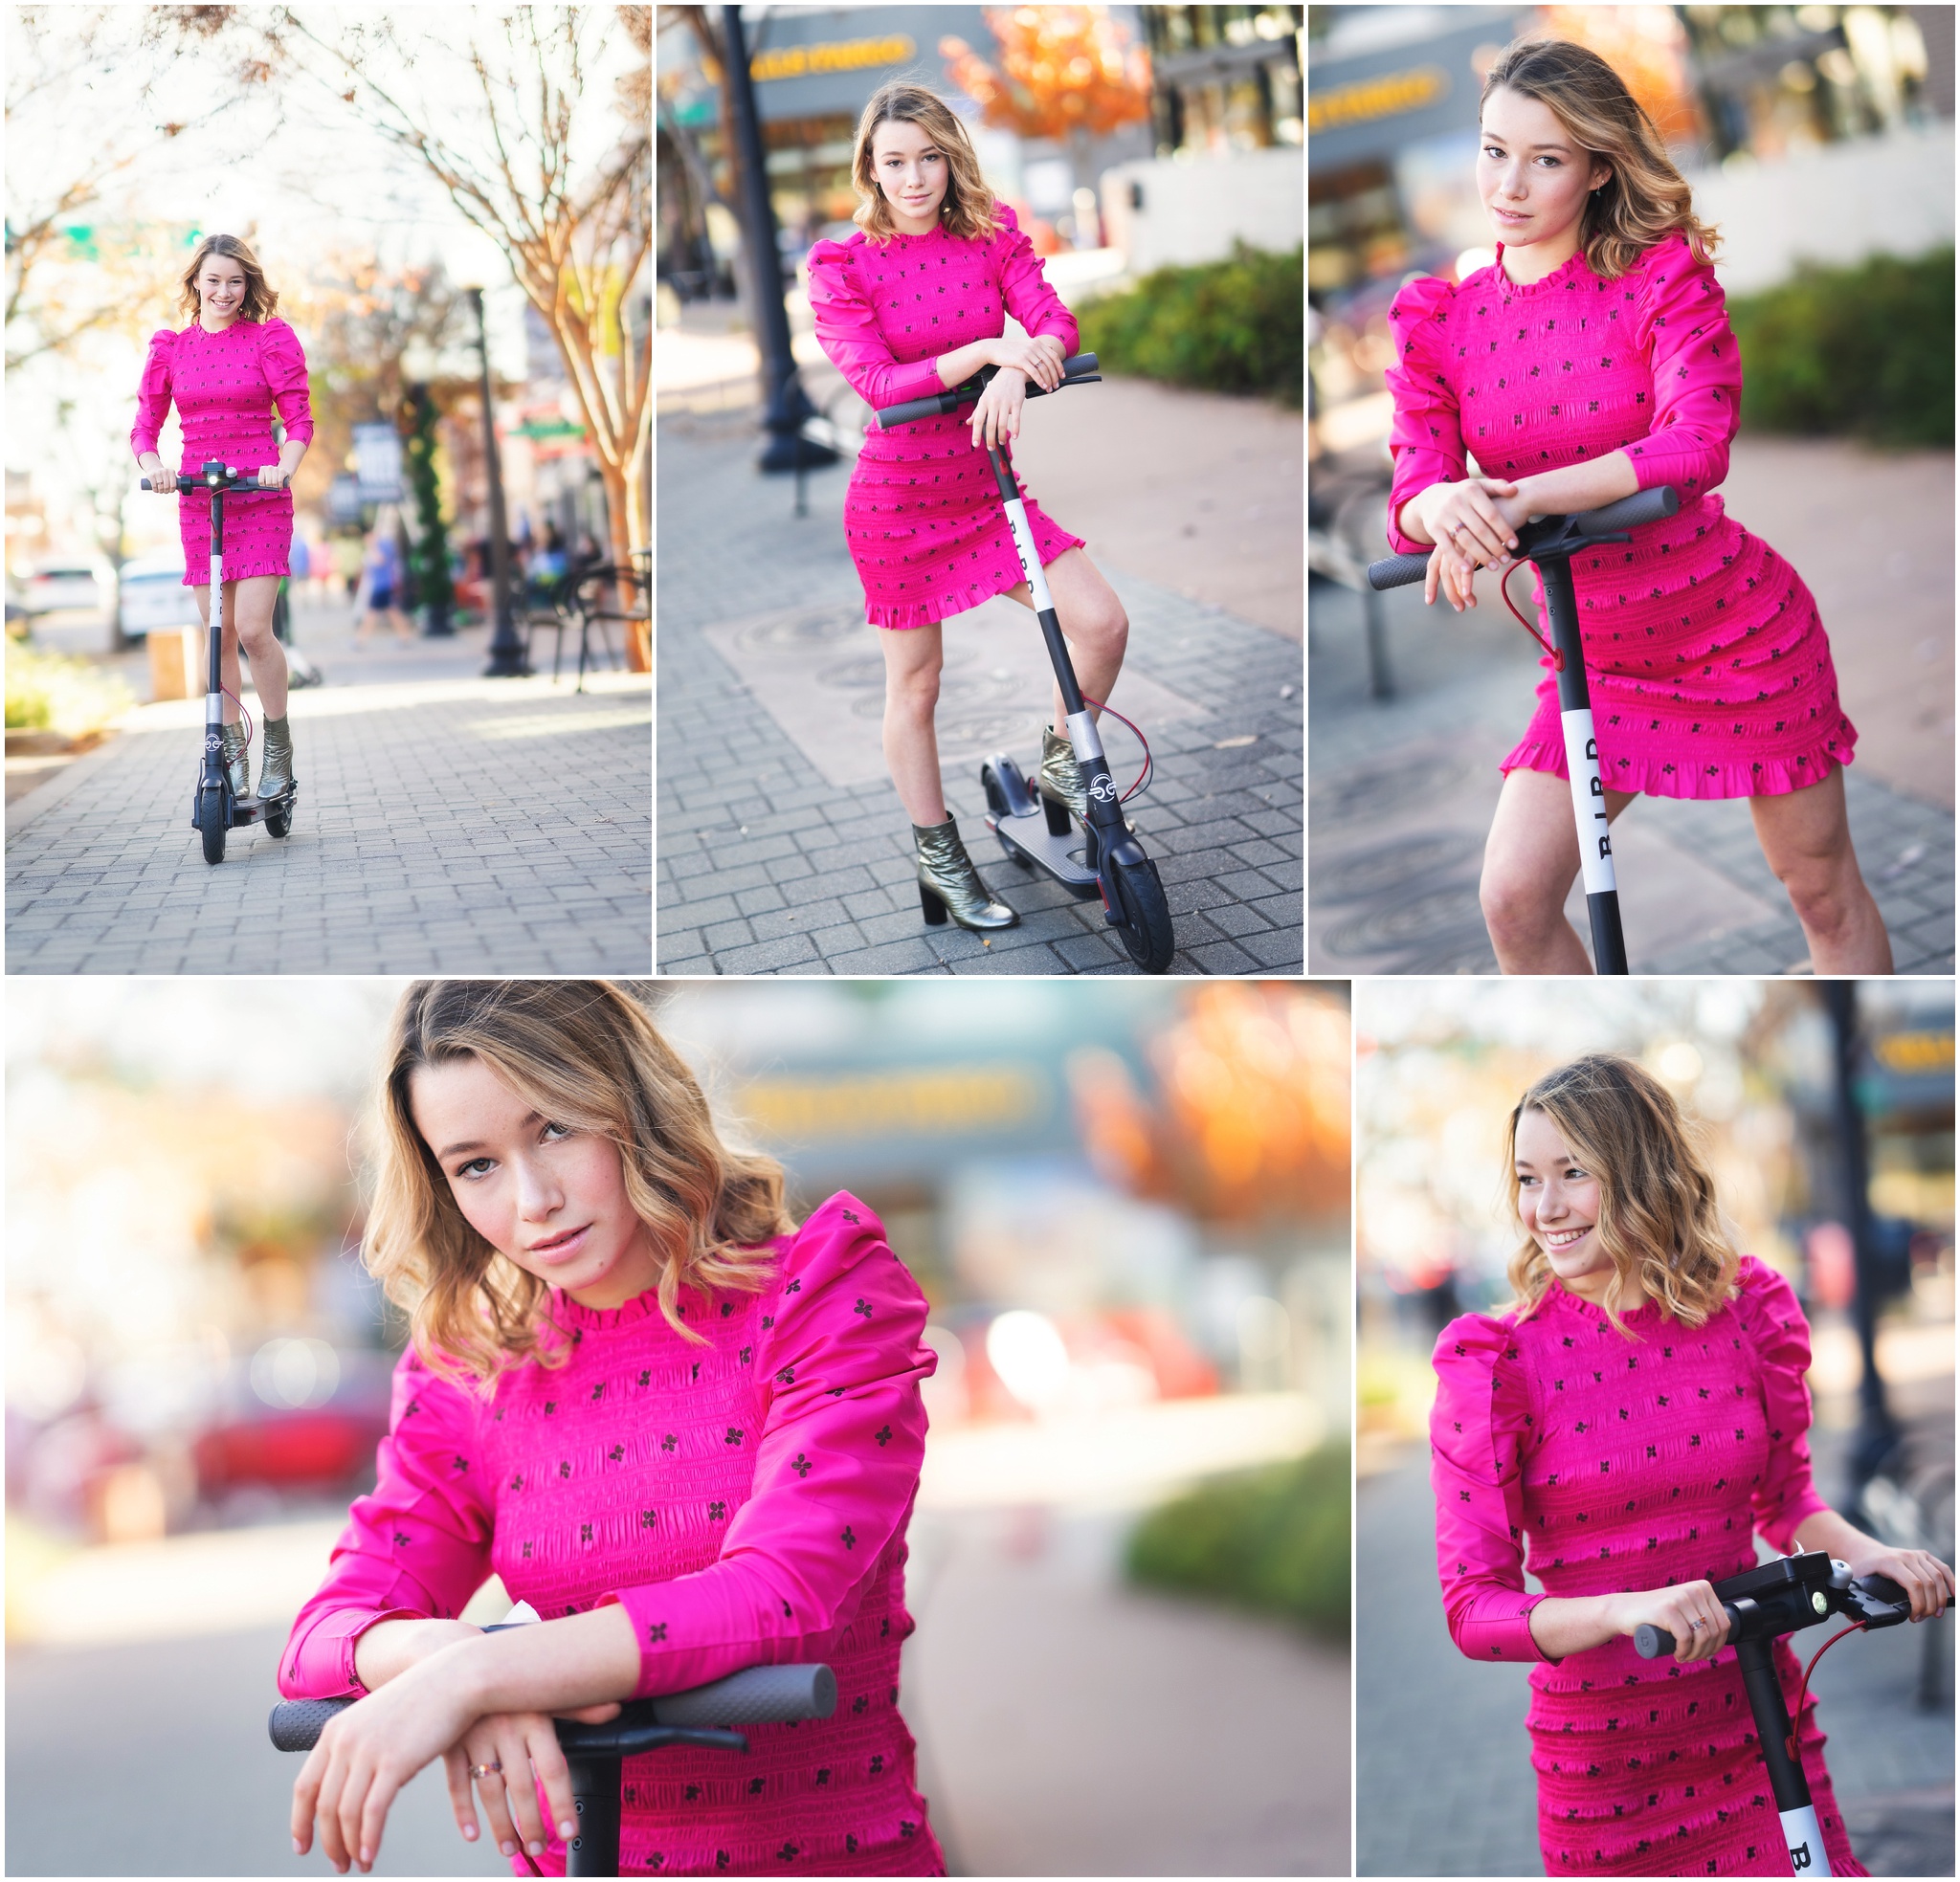 Ava Noble in pink 80s dress riding a scooter through city